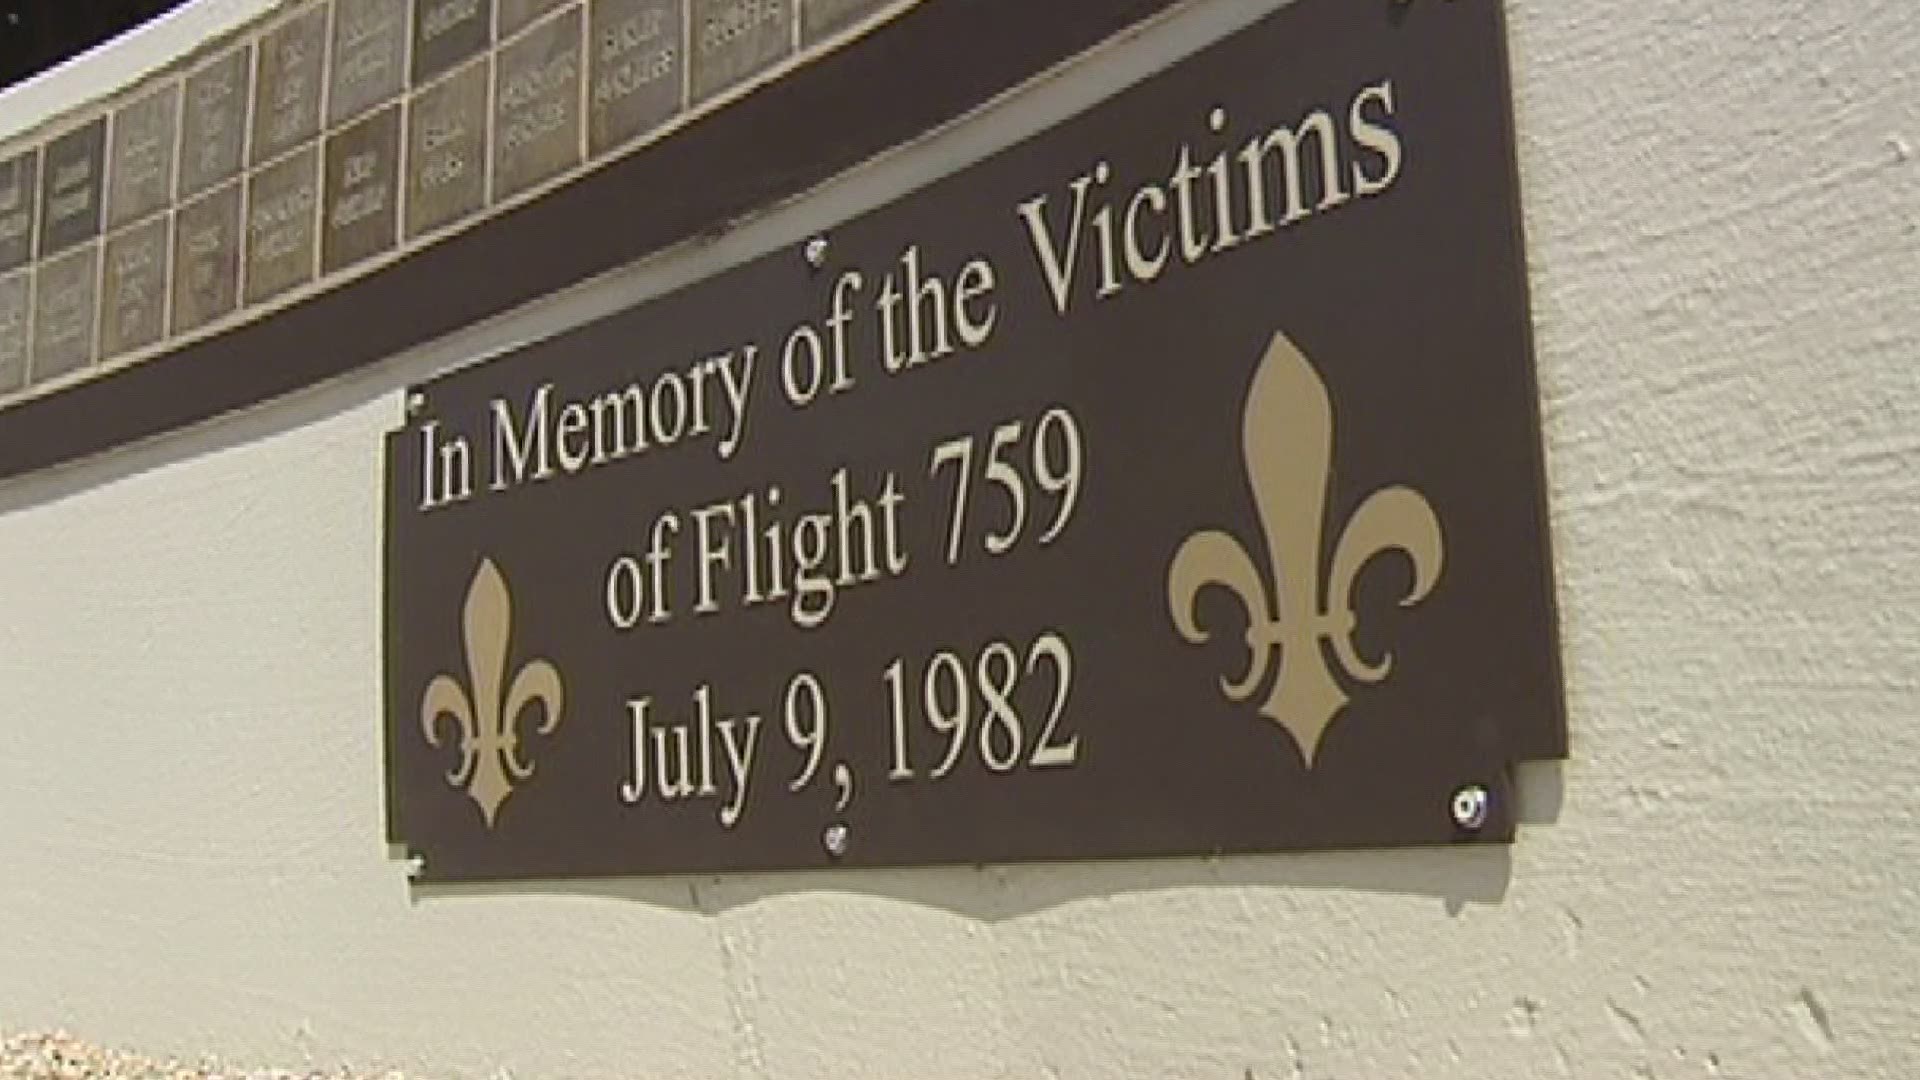 Former WWL-TV Anchor and Reporter Dennis Woltering remembers the crash of Pan Am flight 759.